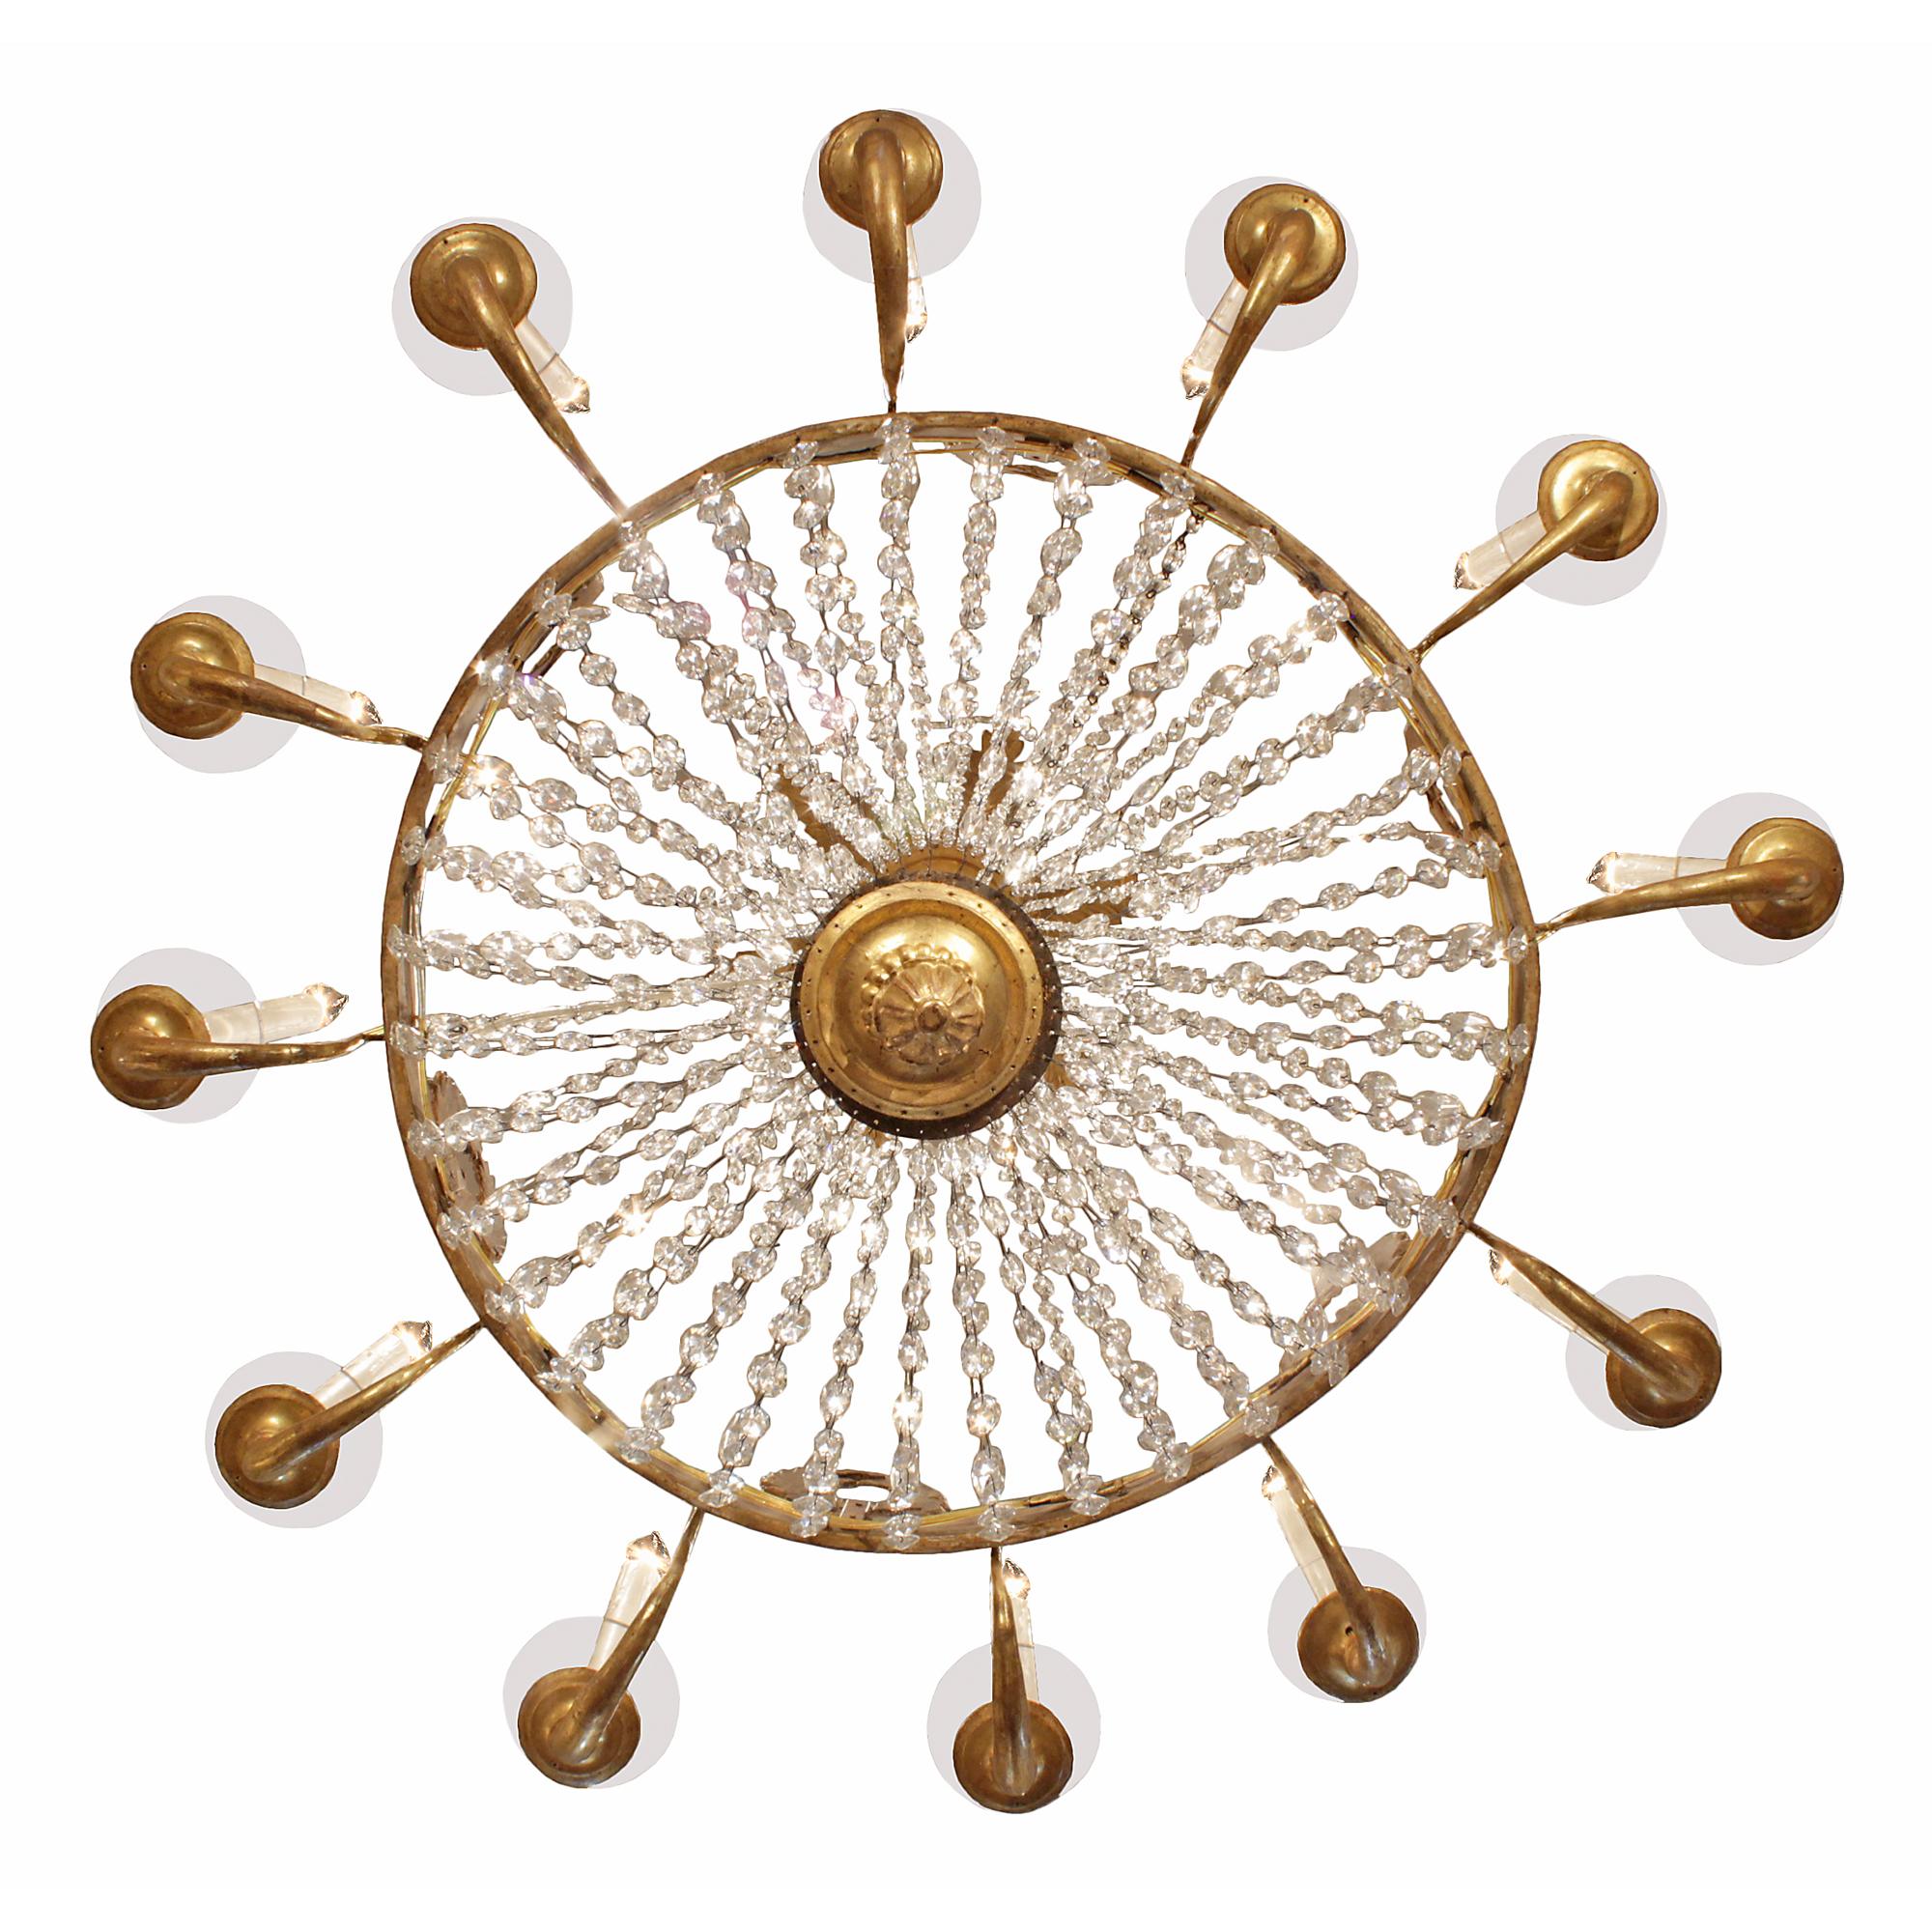 Crystal Italian 18th Century Louis XVI Period Giltwood Chandelier For Sale